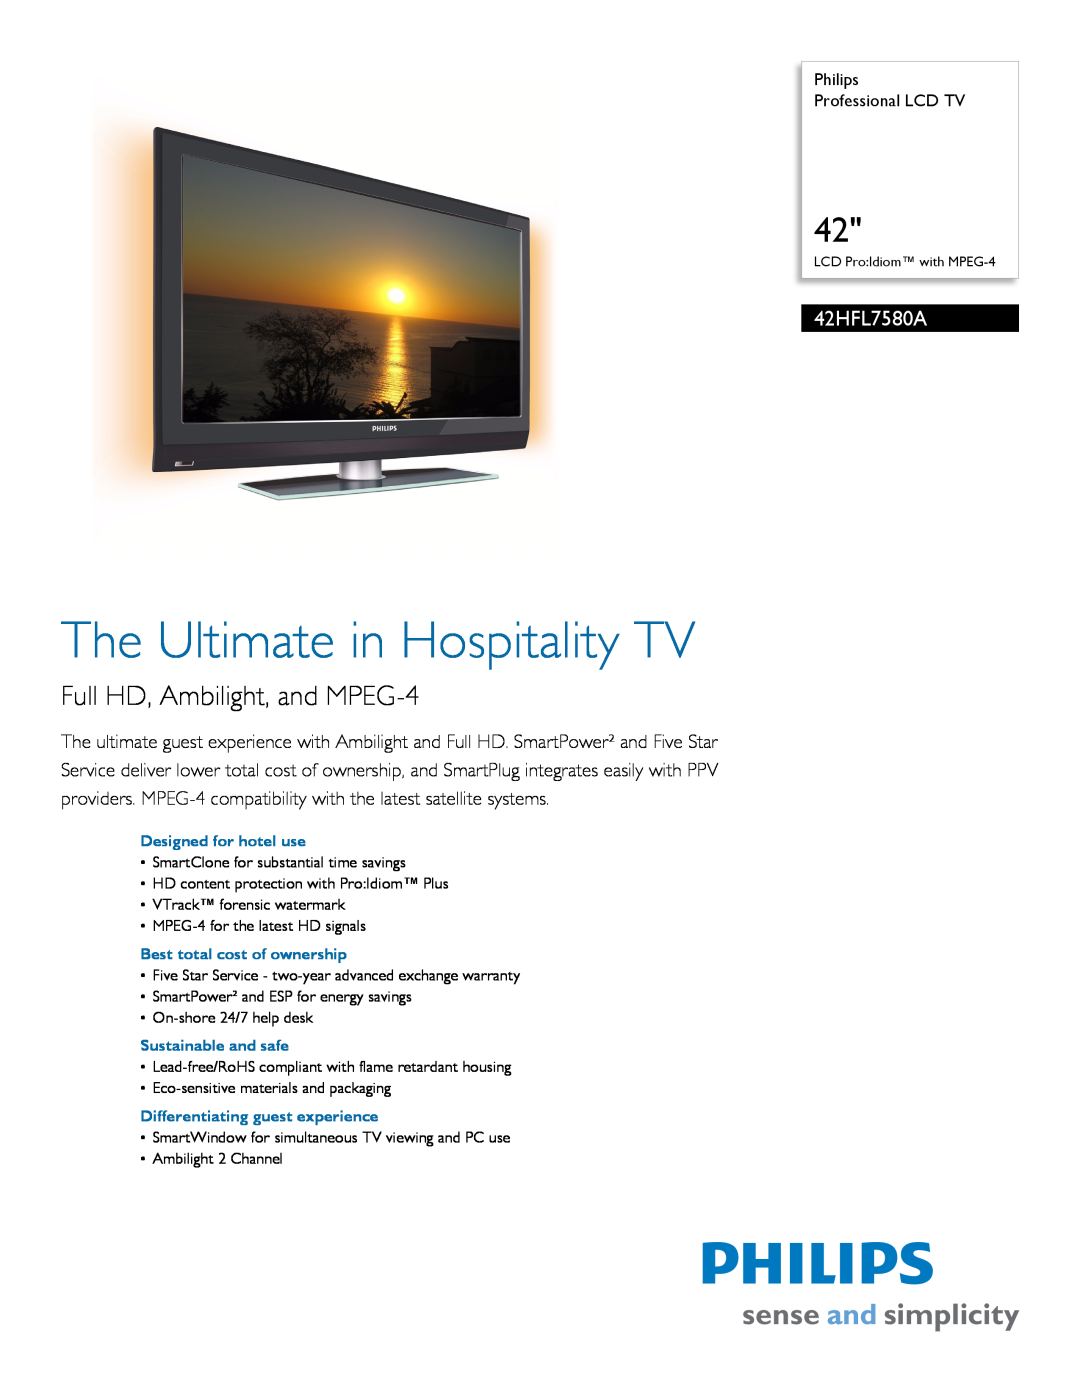 Philips 42HFL7580A warranty The Ultimate in Hospitality TV, Full HD, Ambilight, and MPEG-4 